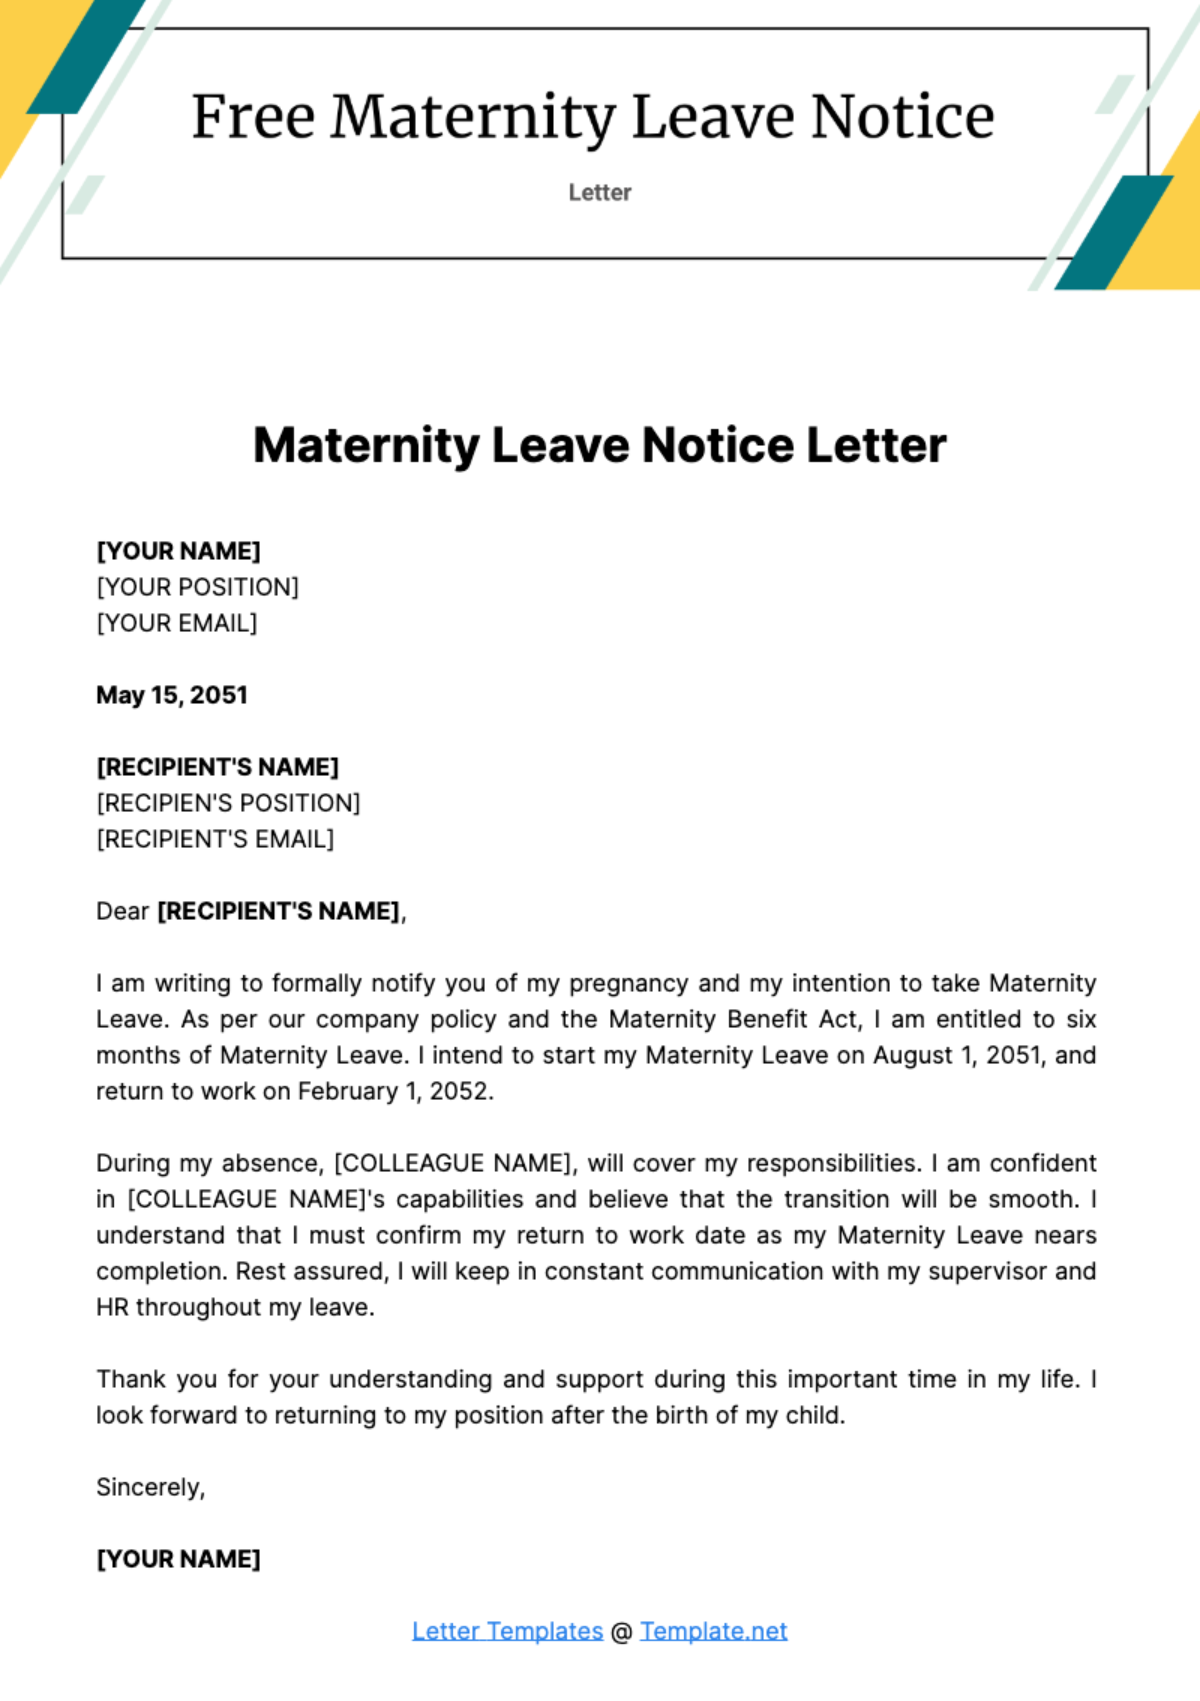 Free Maternity Leave Notice Letter Template